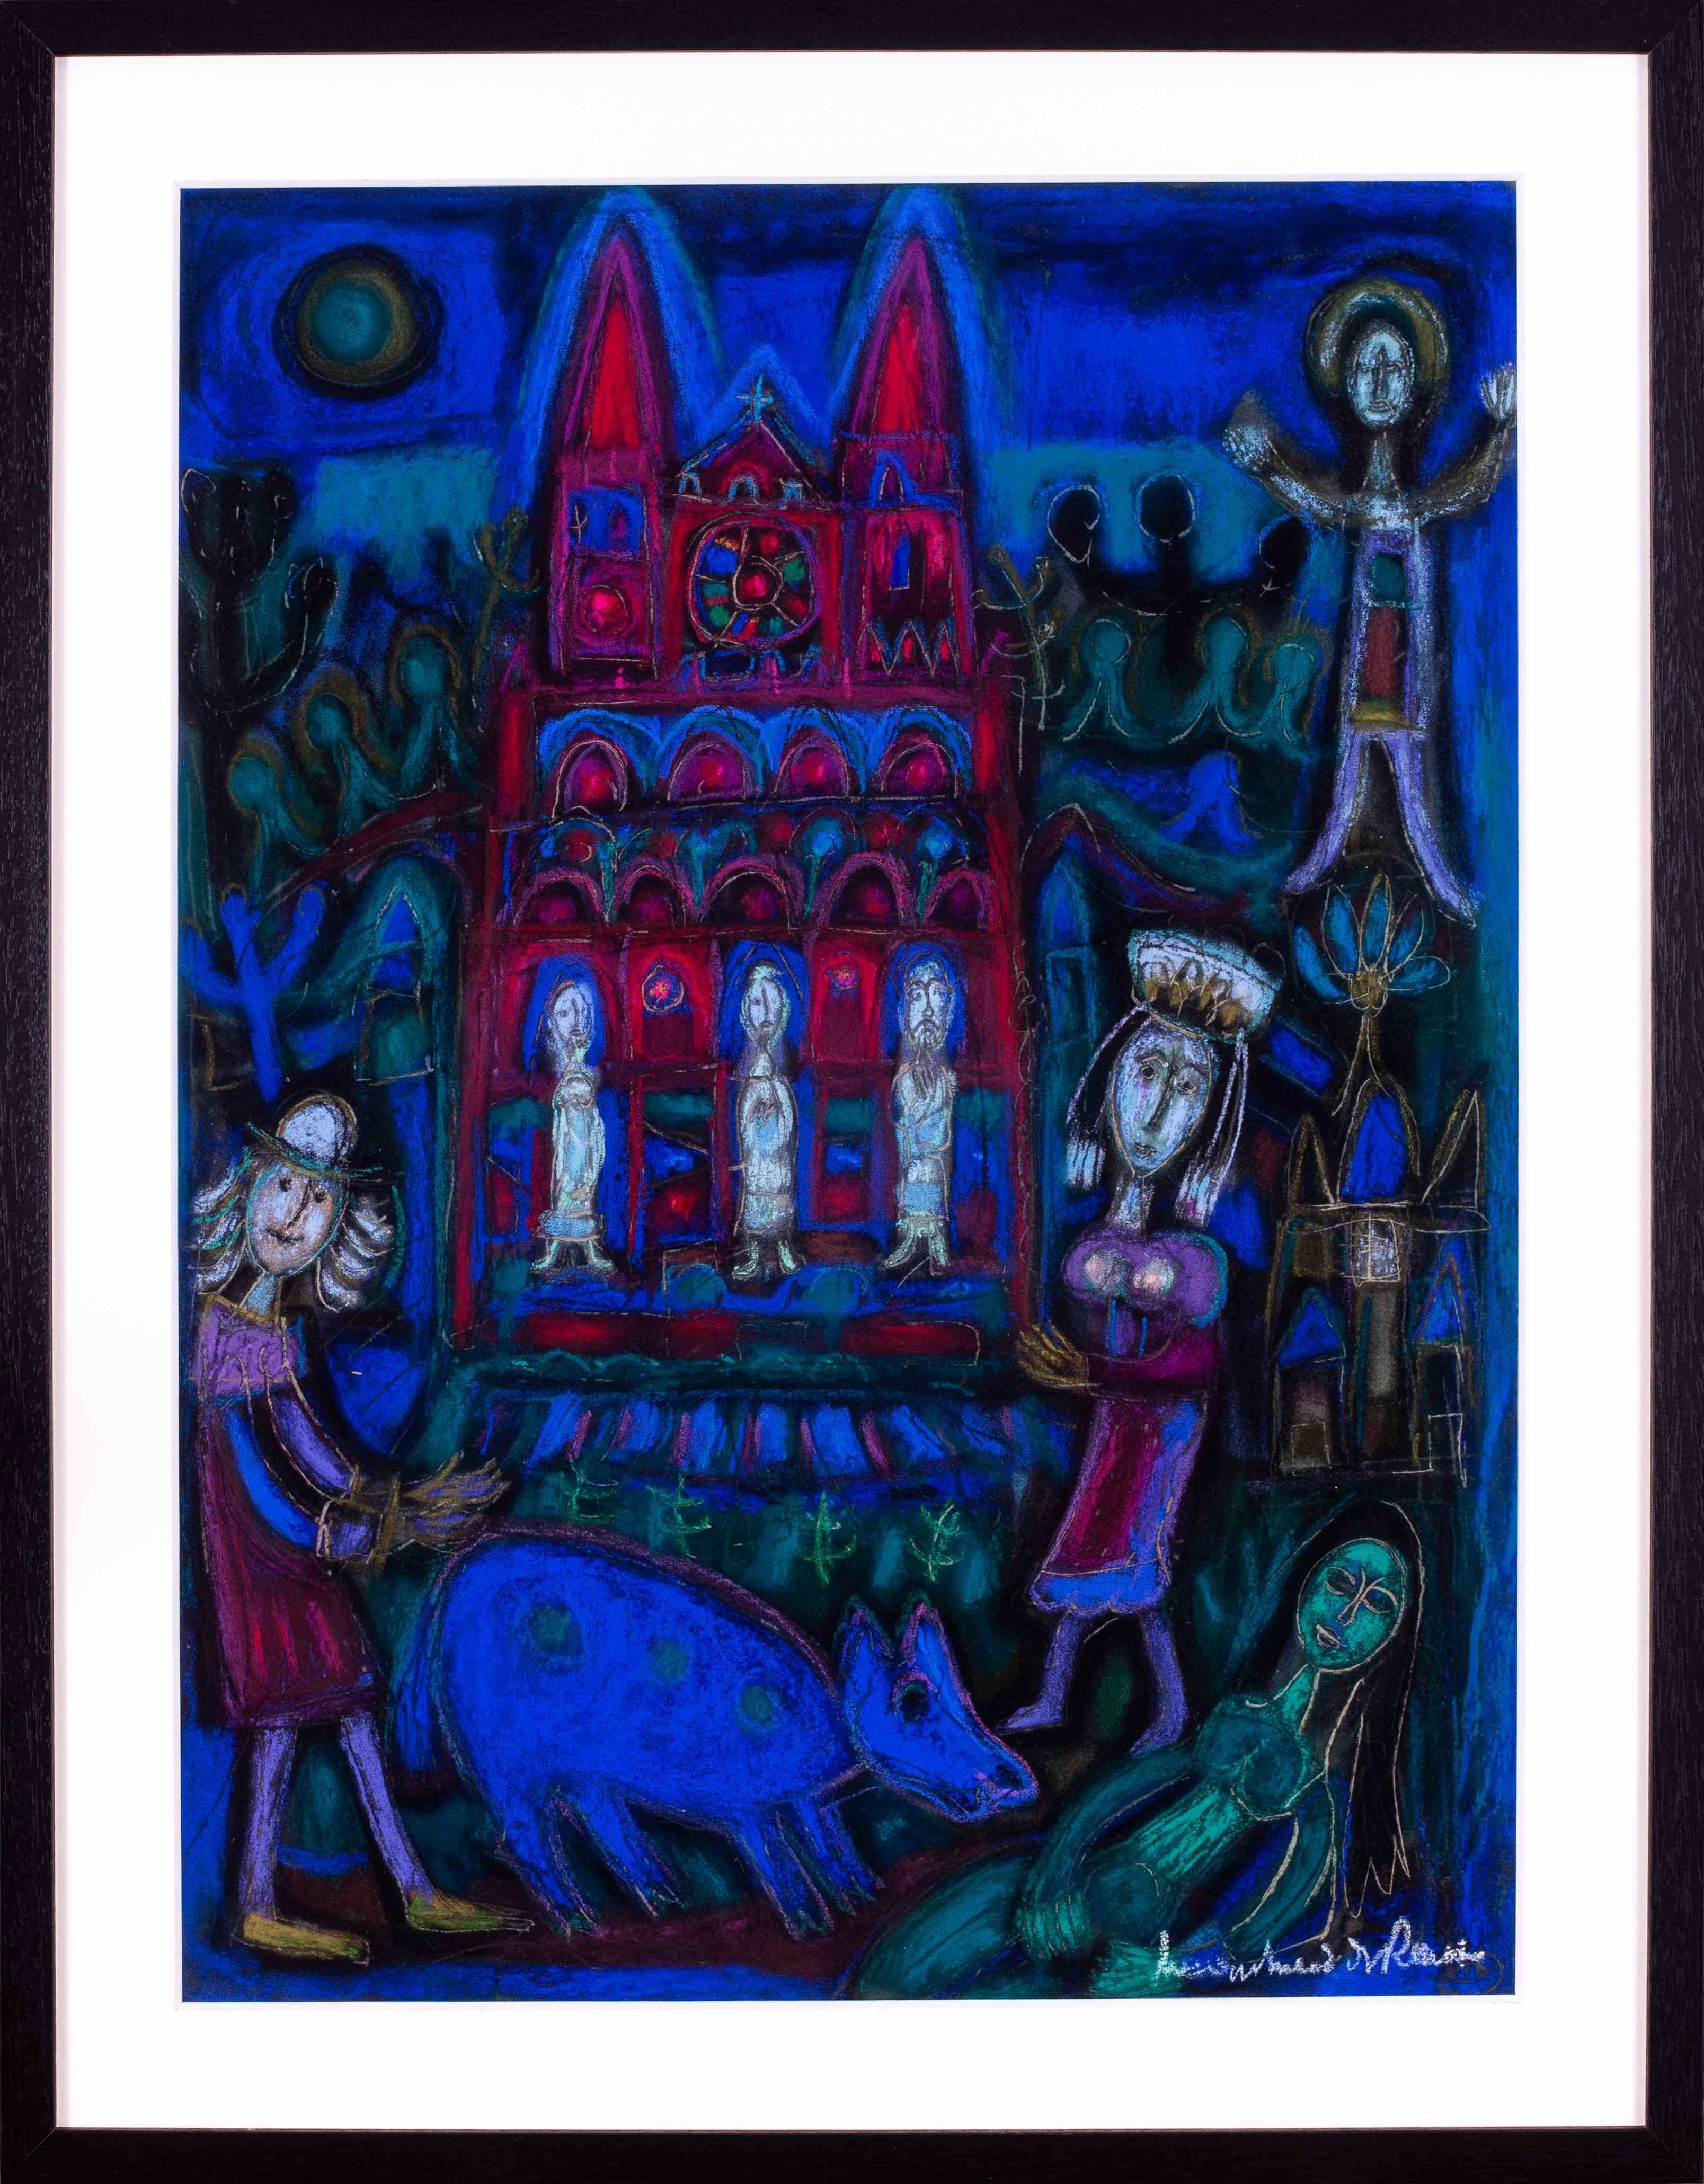 French Surrealist pastel drawing  'In front of the church' by Marchand des Raux